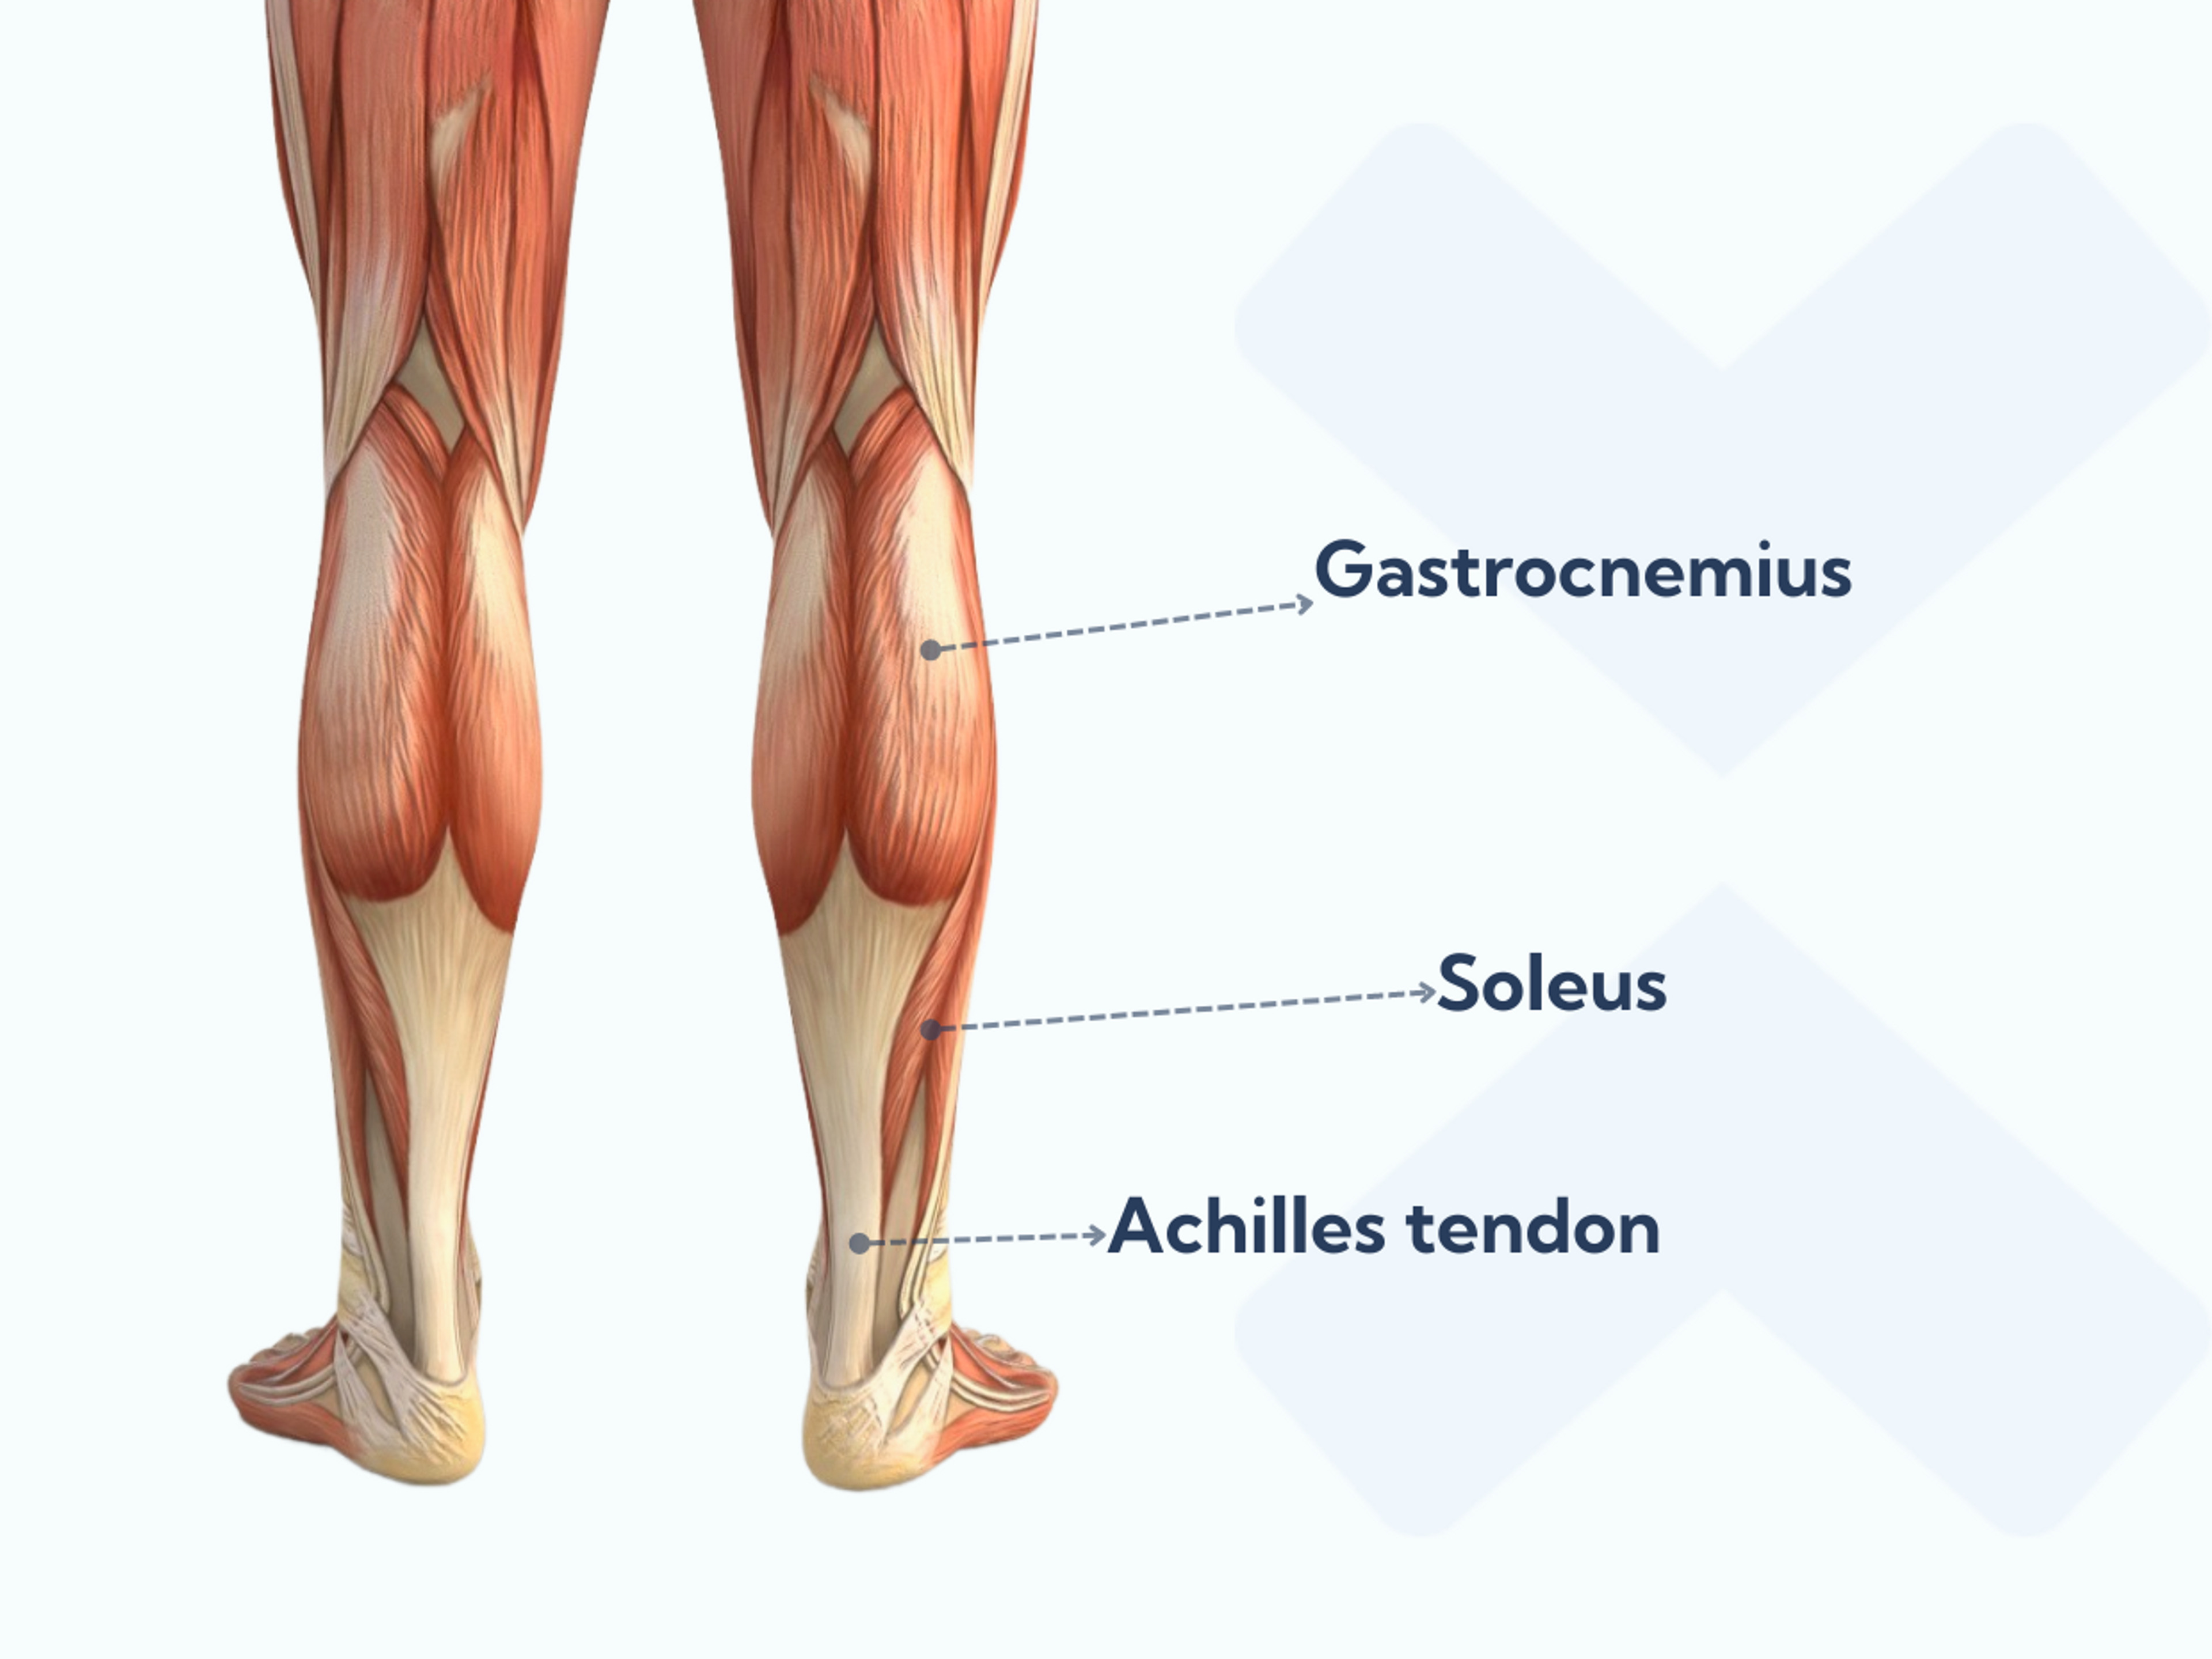 Your calf is in the back of your lower leg and your calf muscles are the Gastrocnemius muscle and Soleus muscle. Your Achilles tendon attaches your calf muscles to your heel bone.